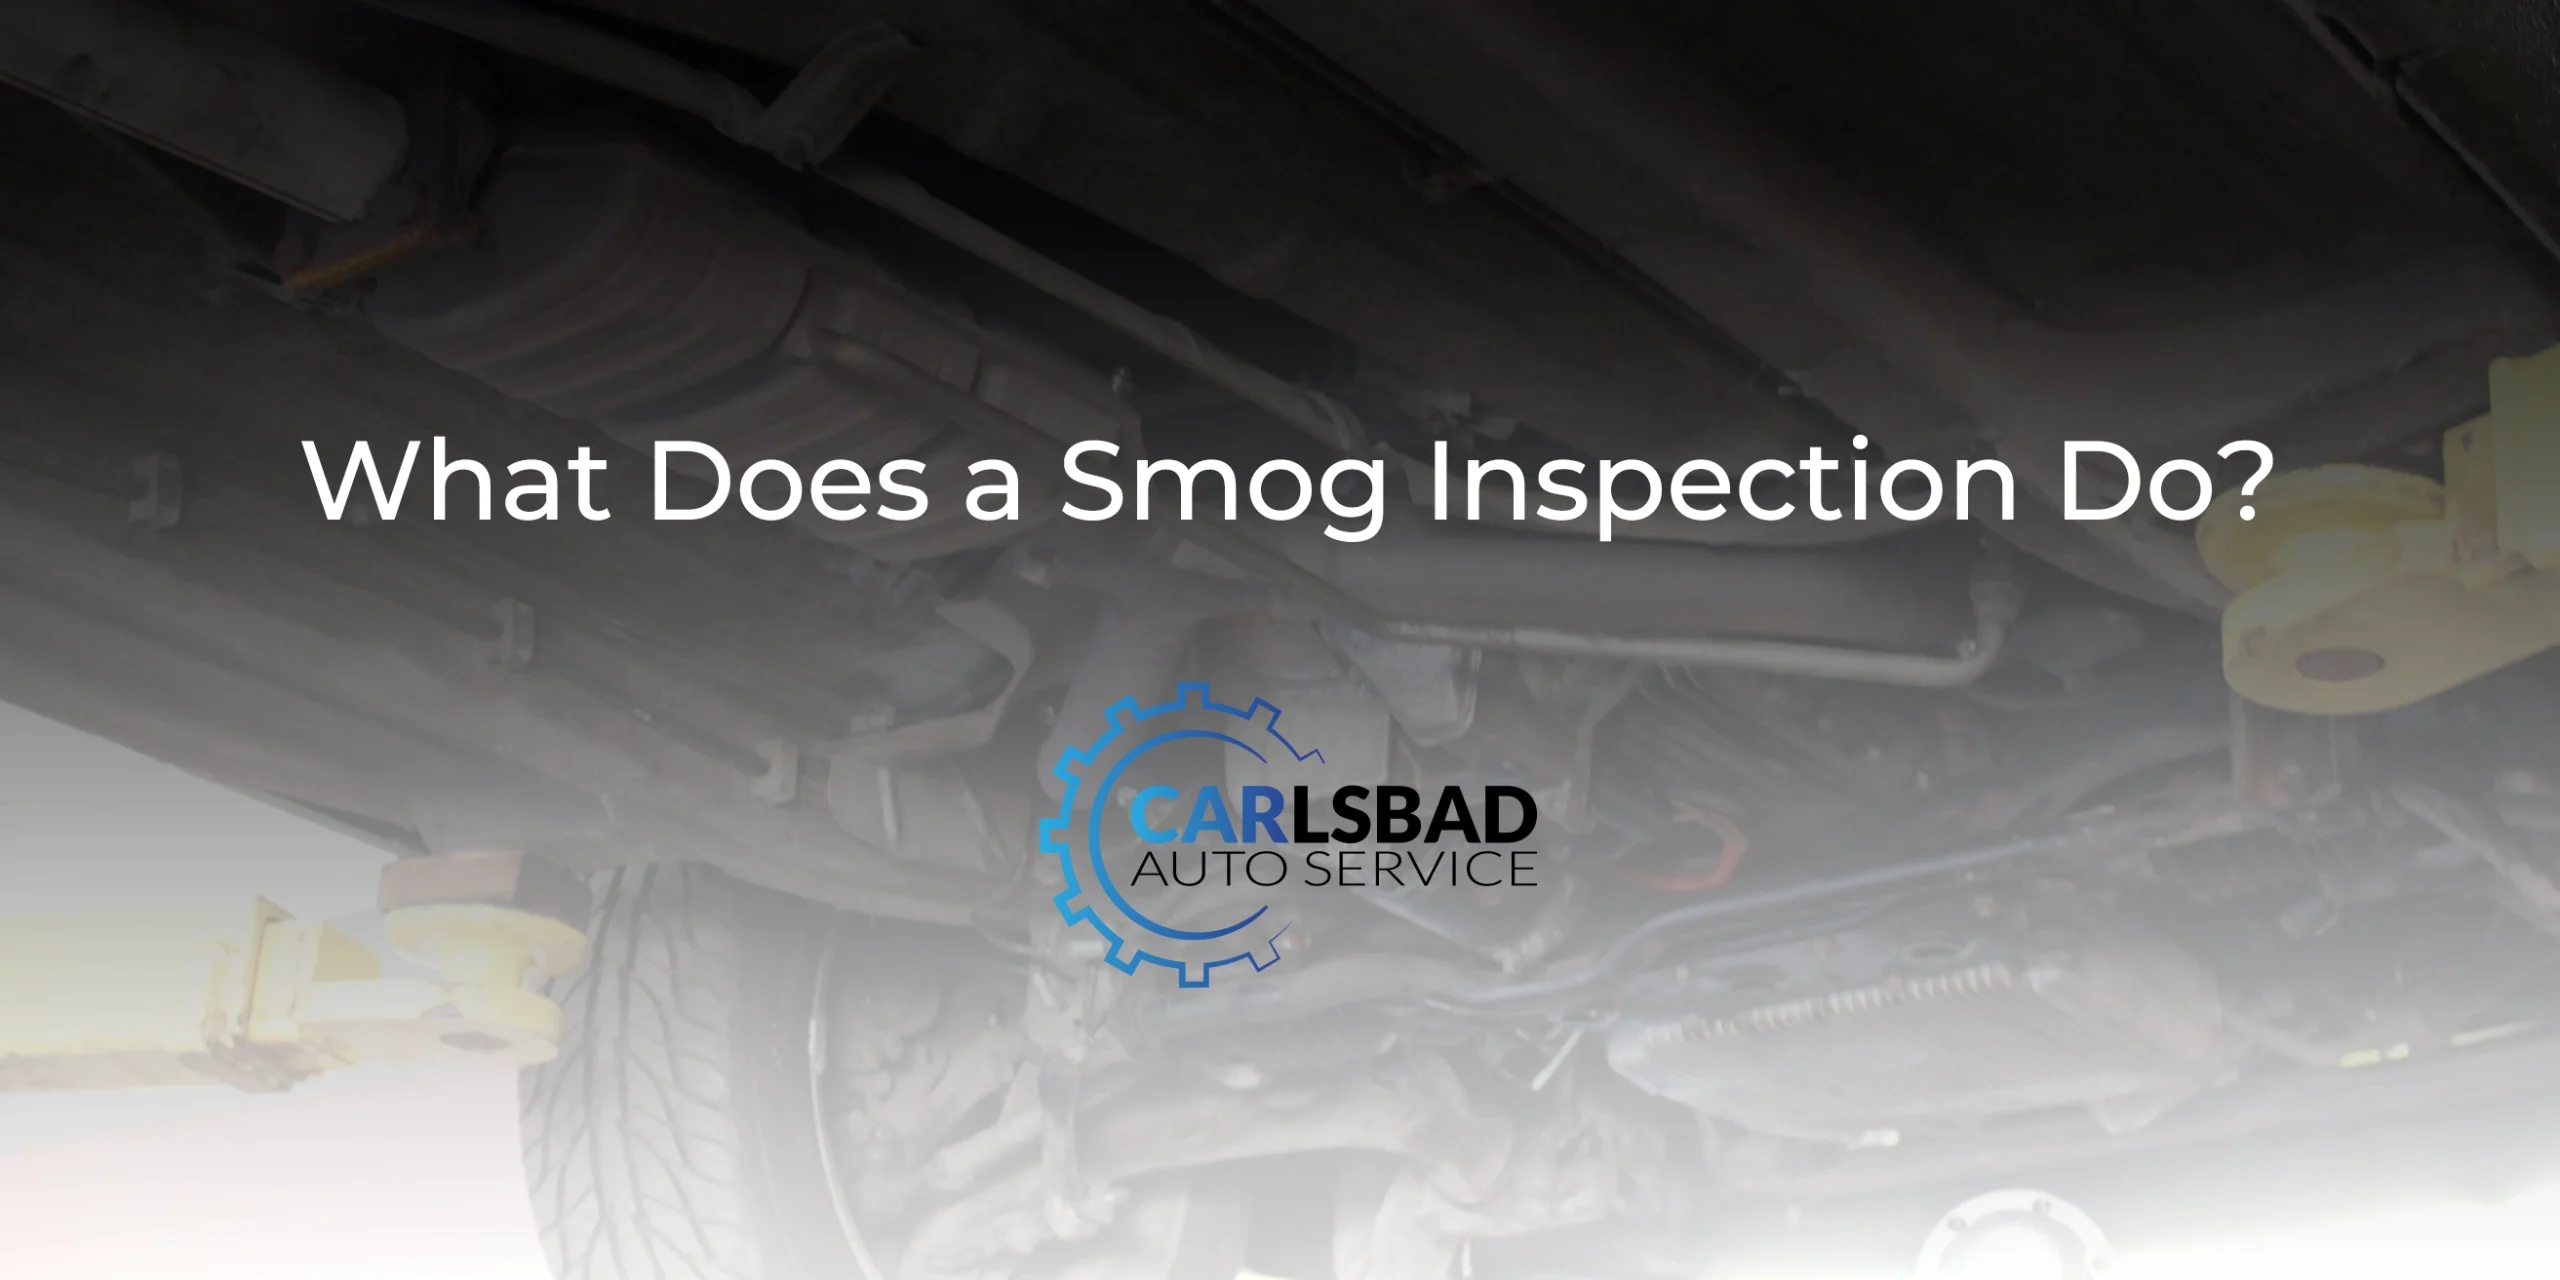 What Does a Smog Inspection Do?